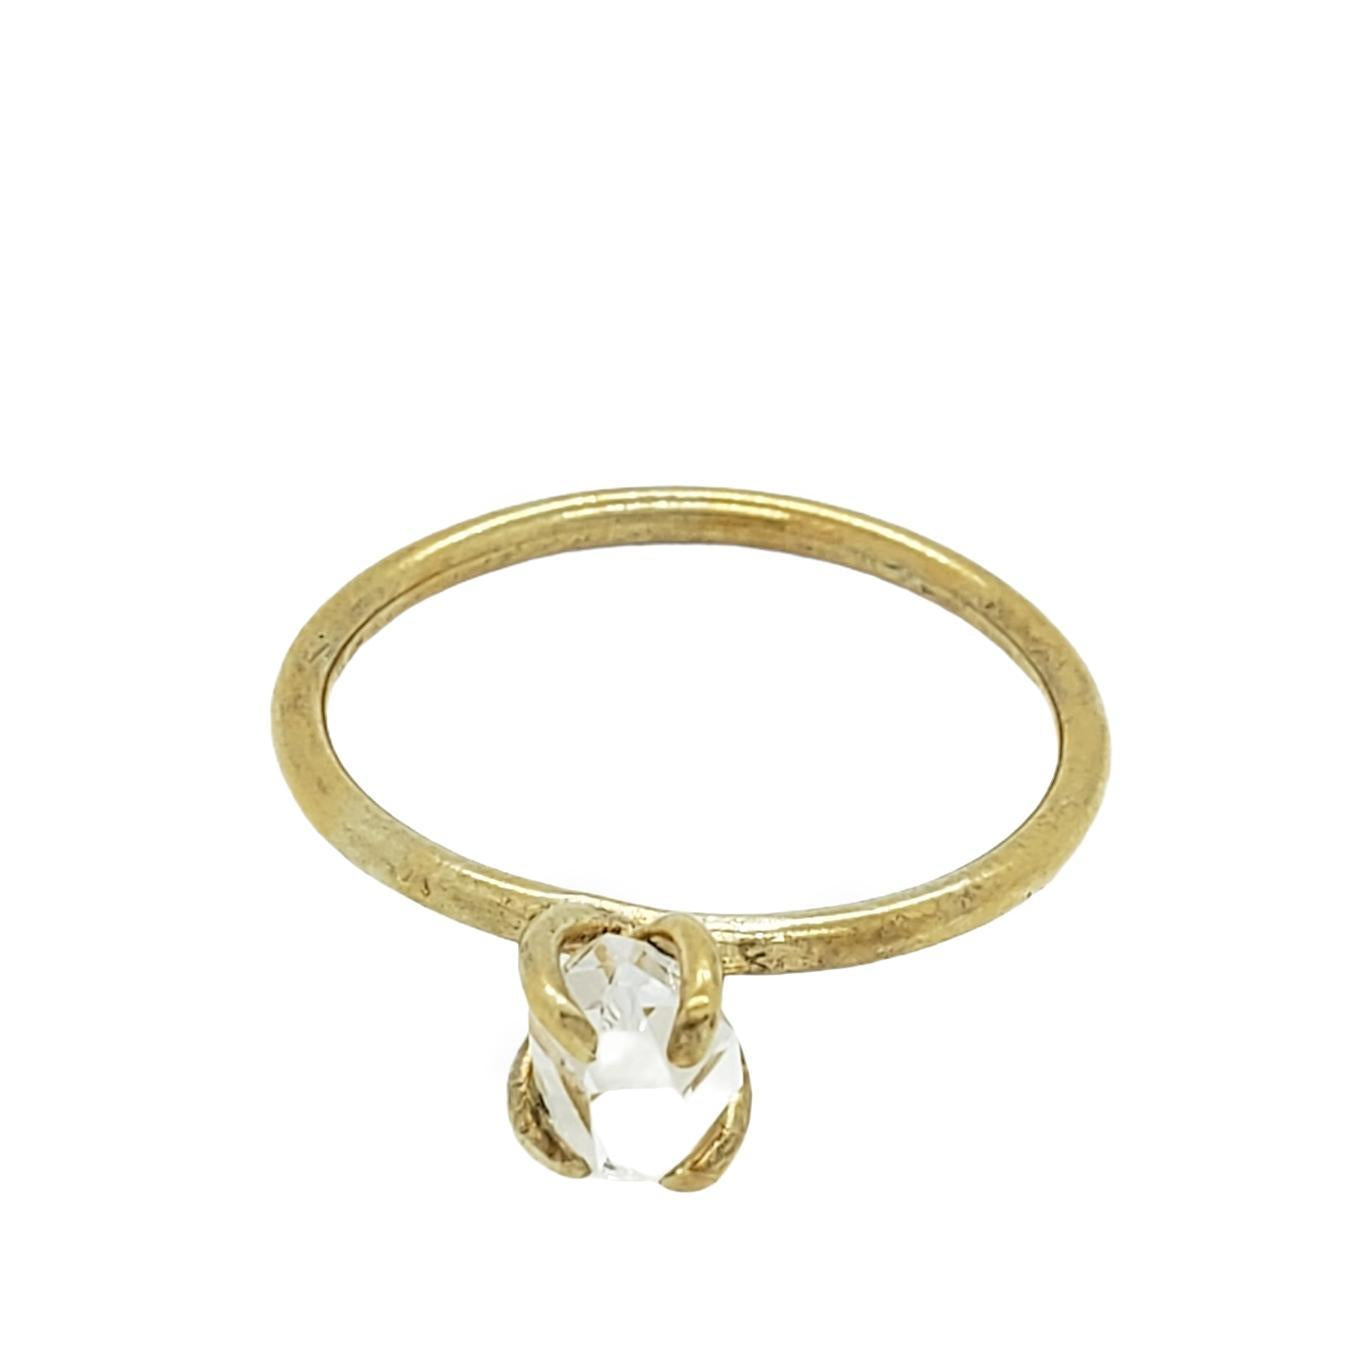 Ring - Size 8.25 - Classic Vertical Herkimer in Yellow Gold Vermeil by Stórica Studio